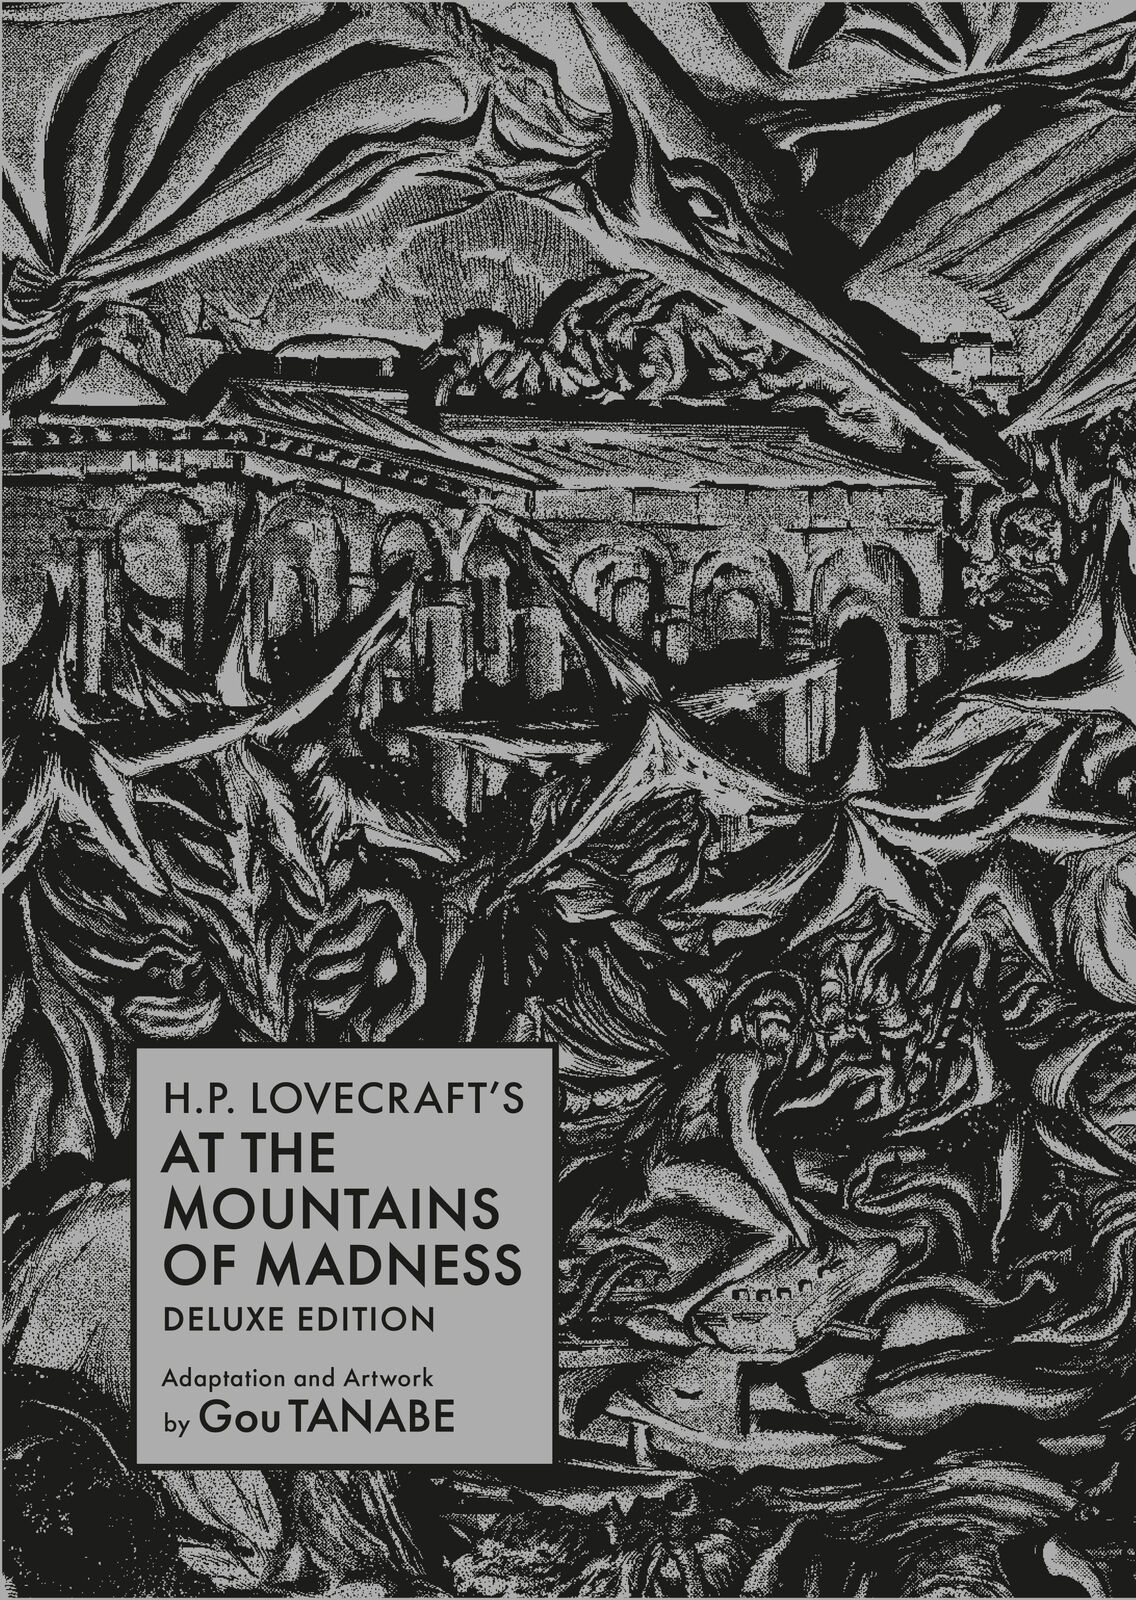 H.P. Lovecraft's At the Mountains of Madness Deluxe Edition Manga 4/4/24 PRESALE